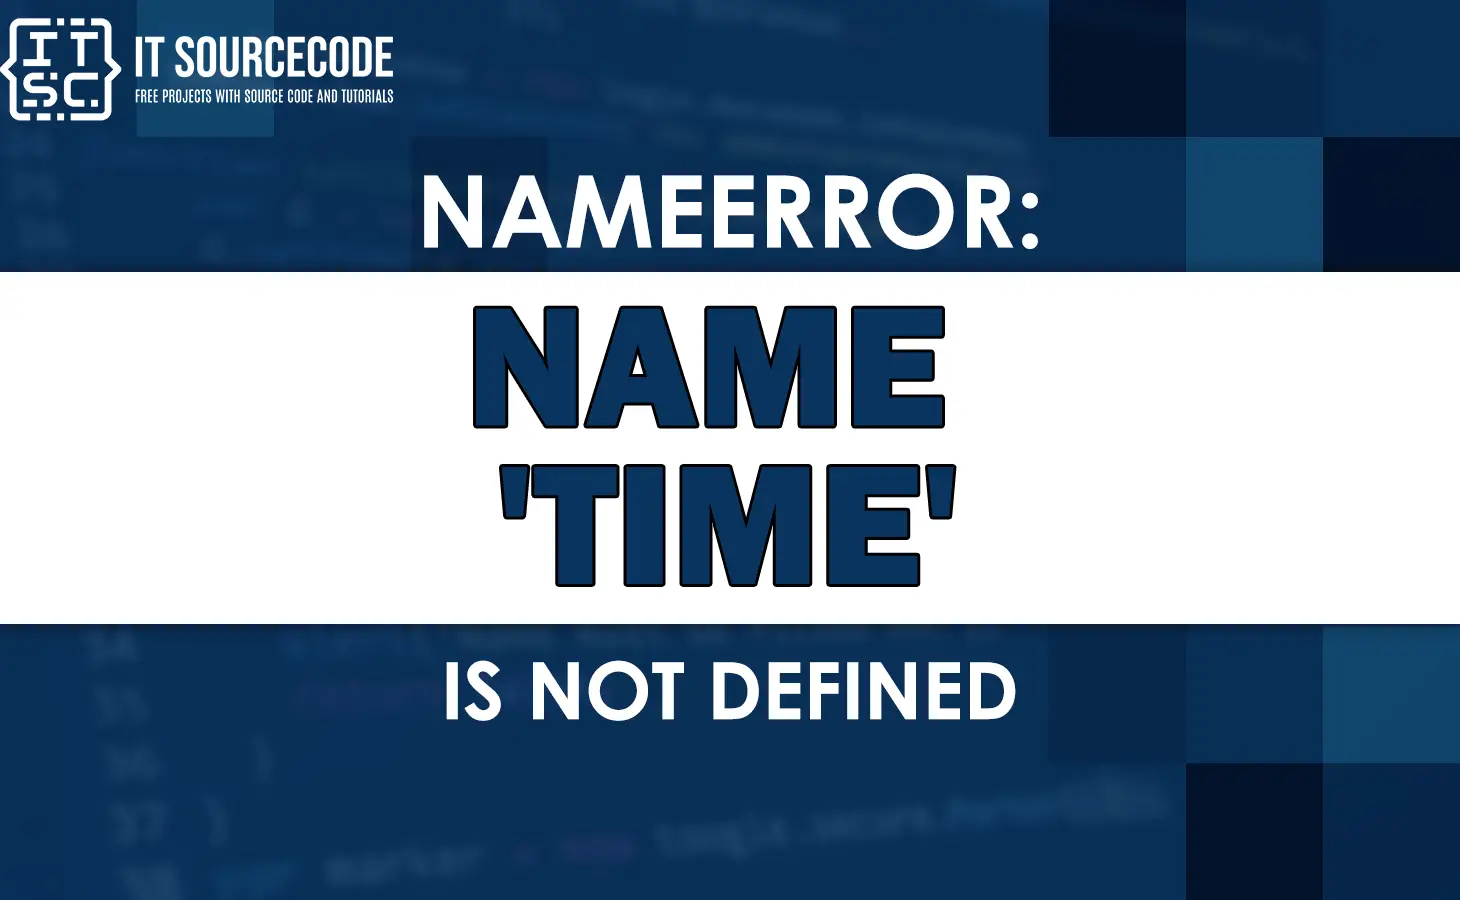 Nameerror: name time is not defined